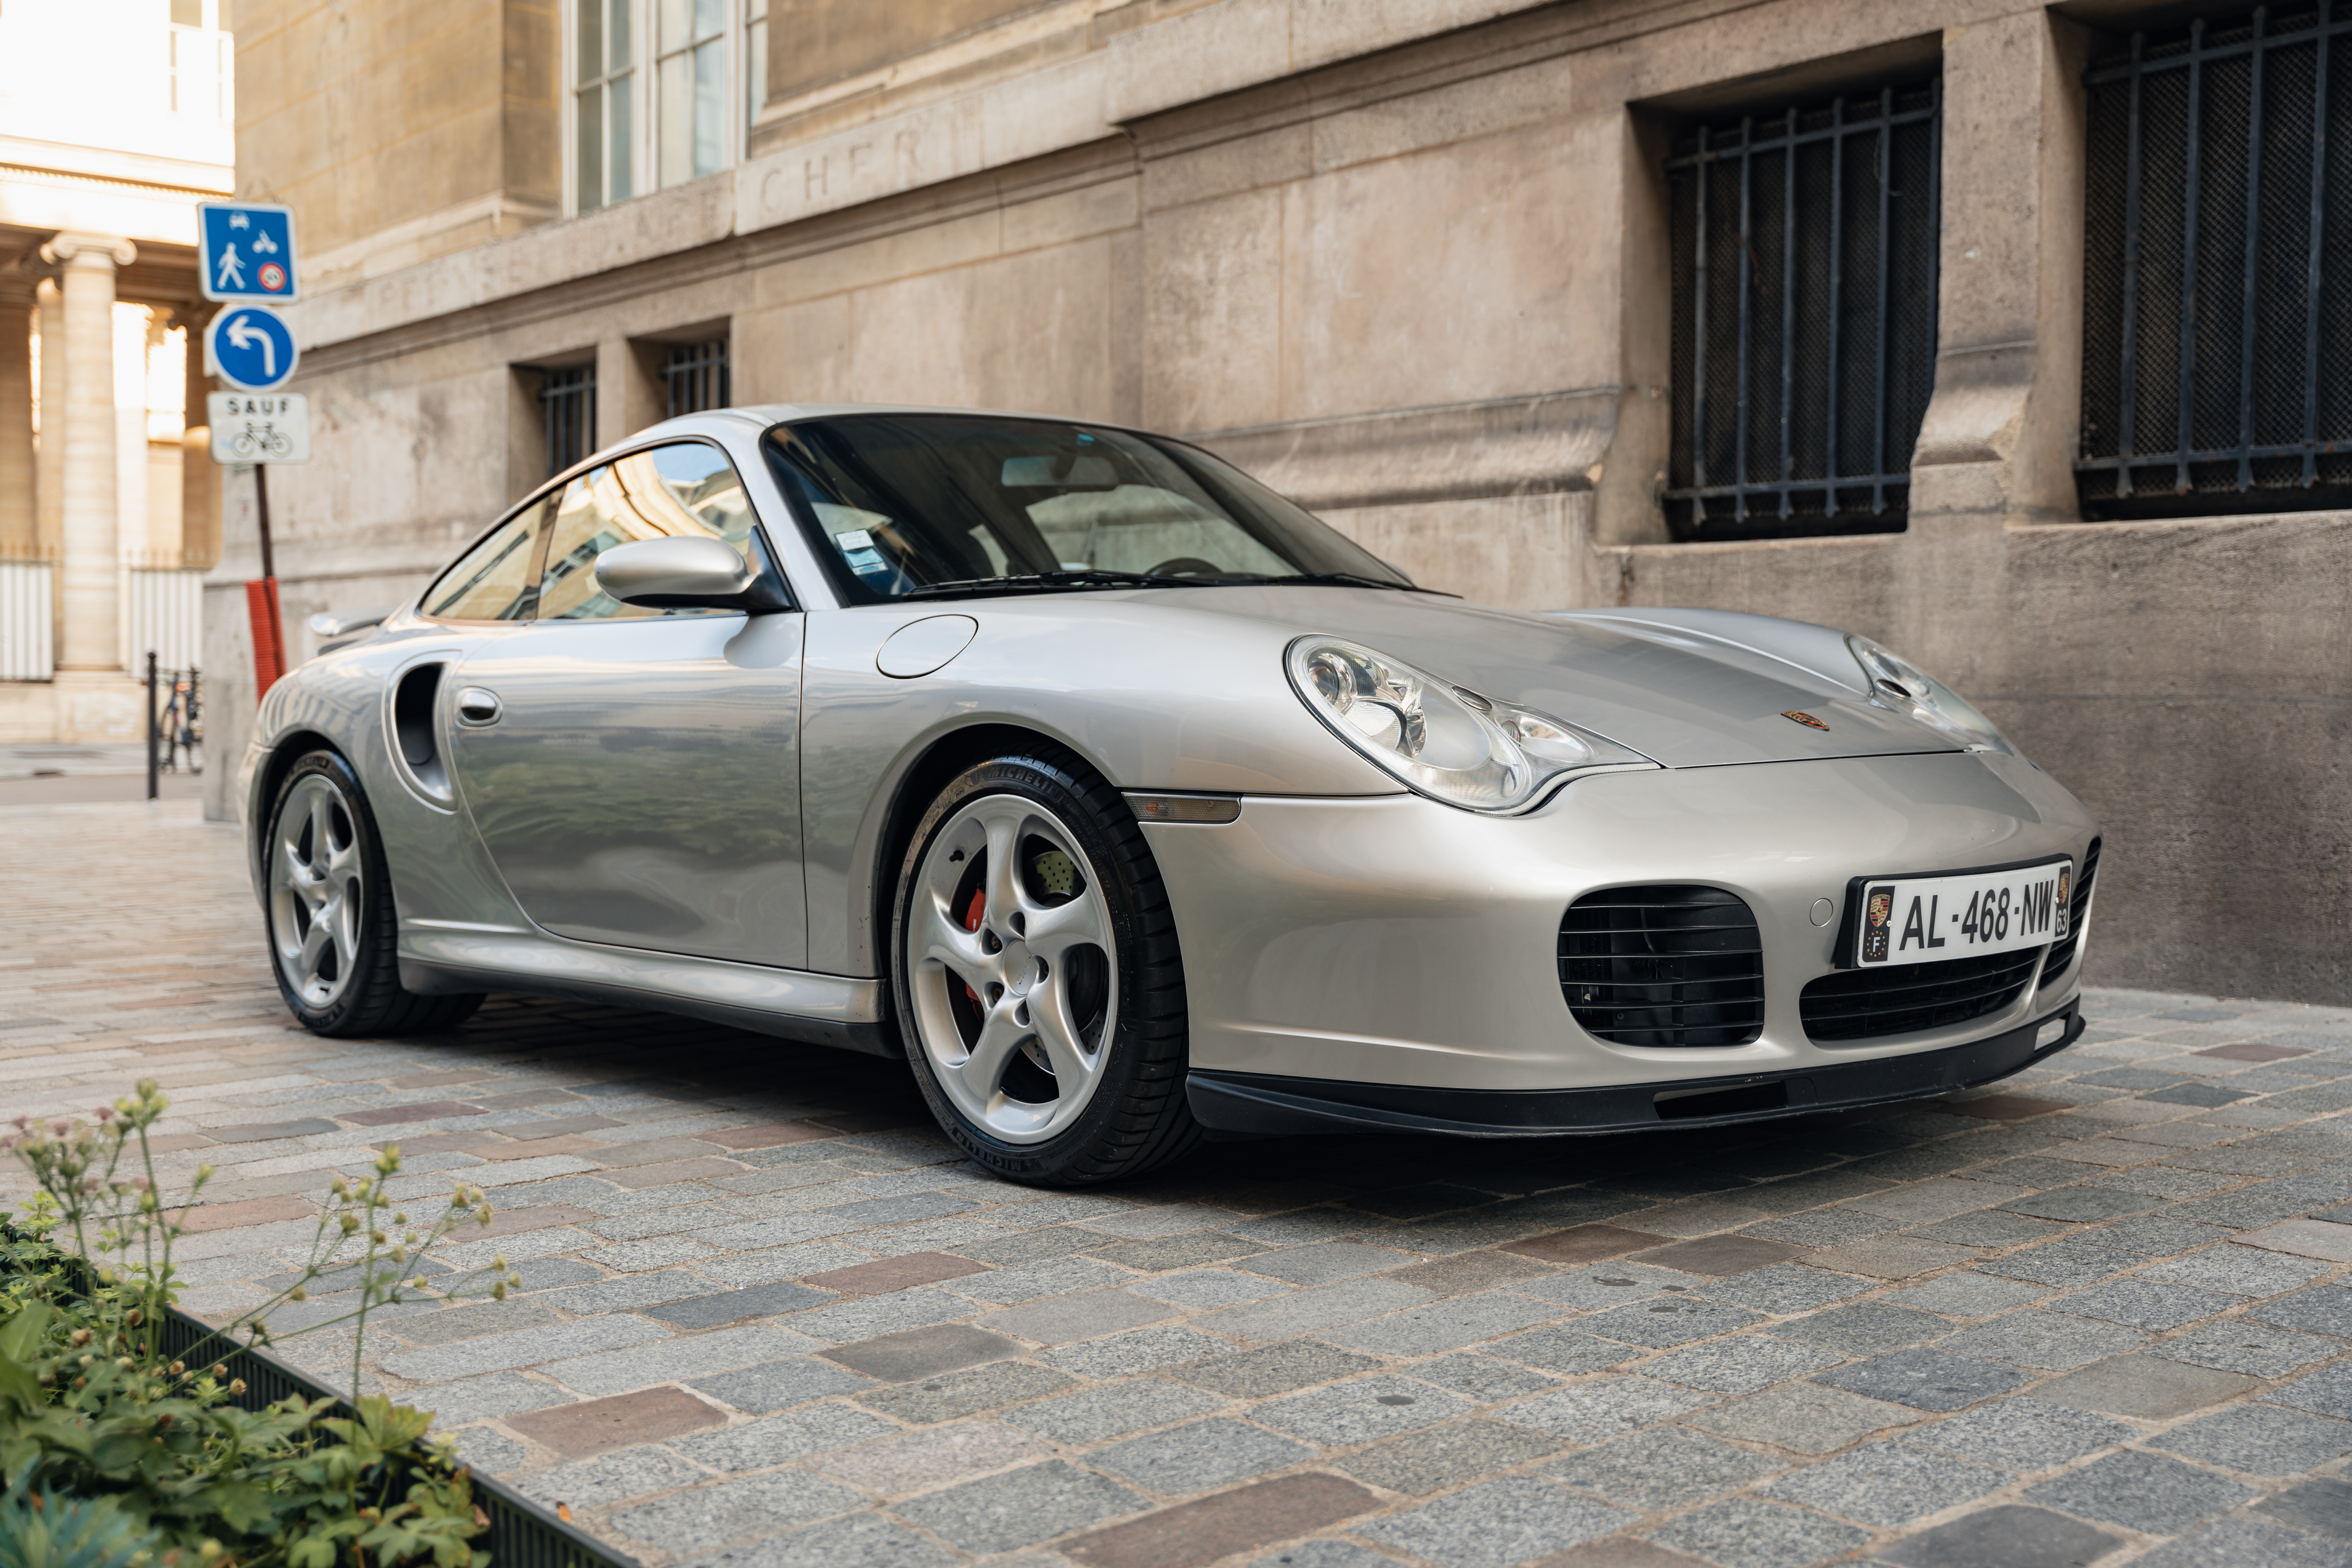 2001 Porsche 911 (996) Turbo - G-Force Upgrade for sale by auction 